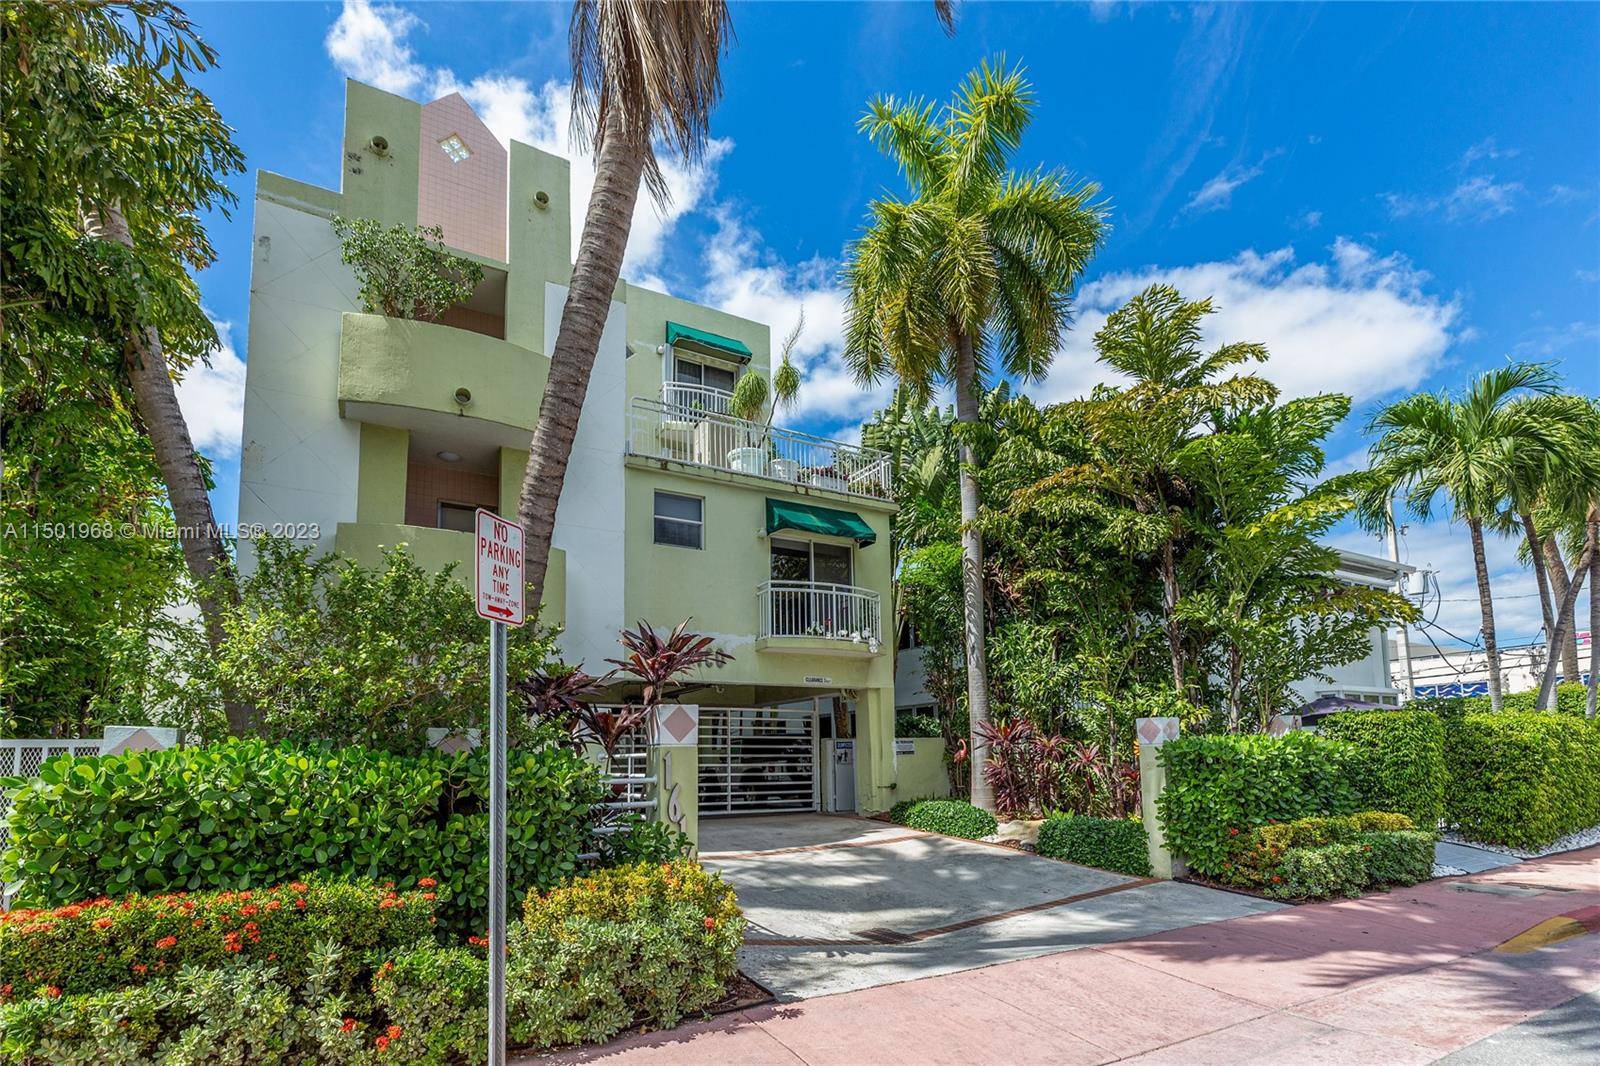 Excellent location a block away from Lincoln Road.